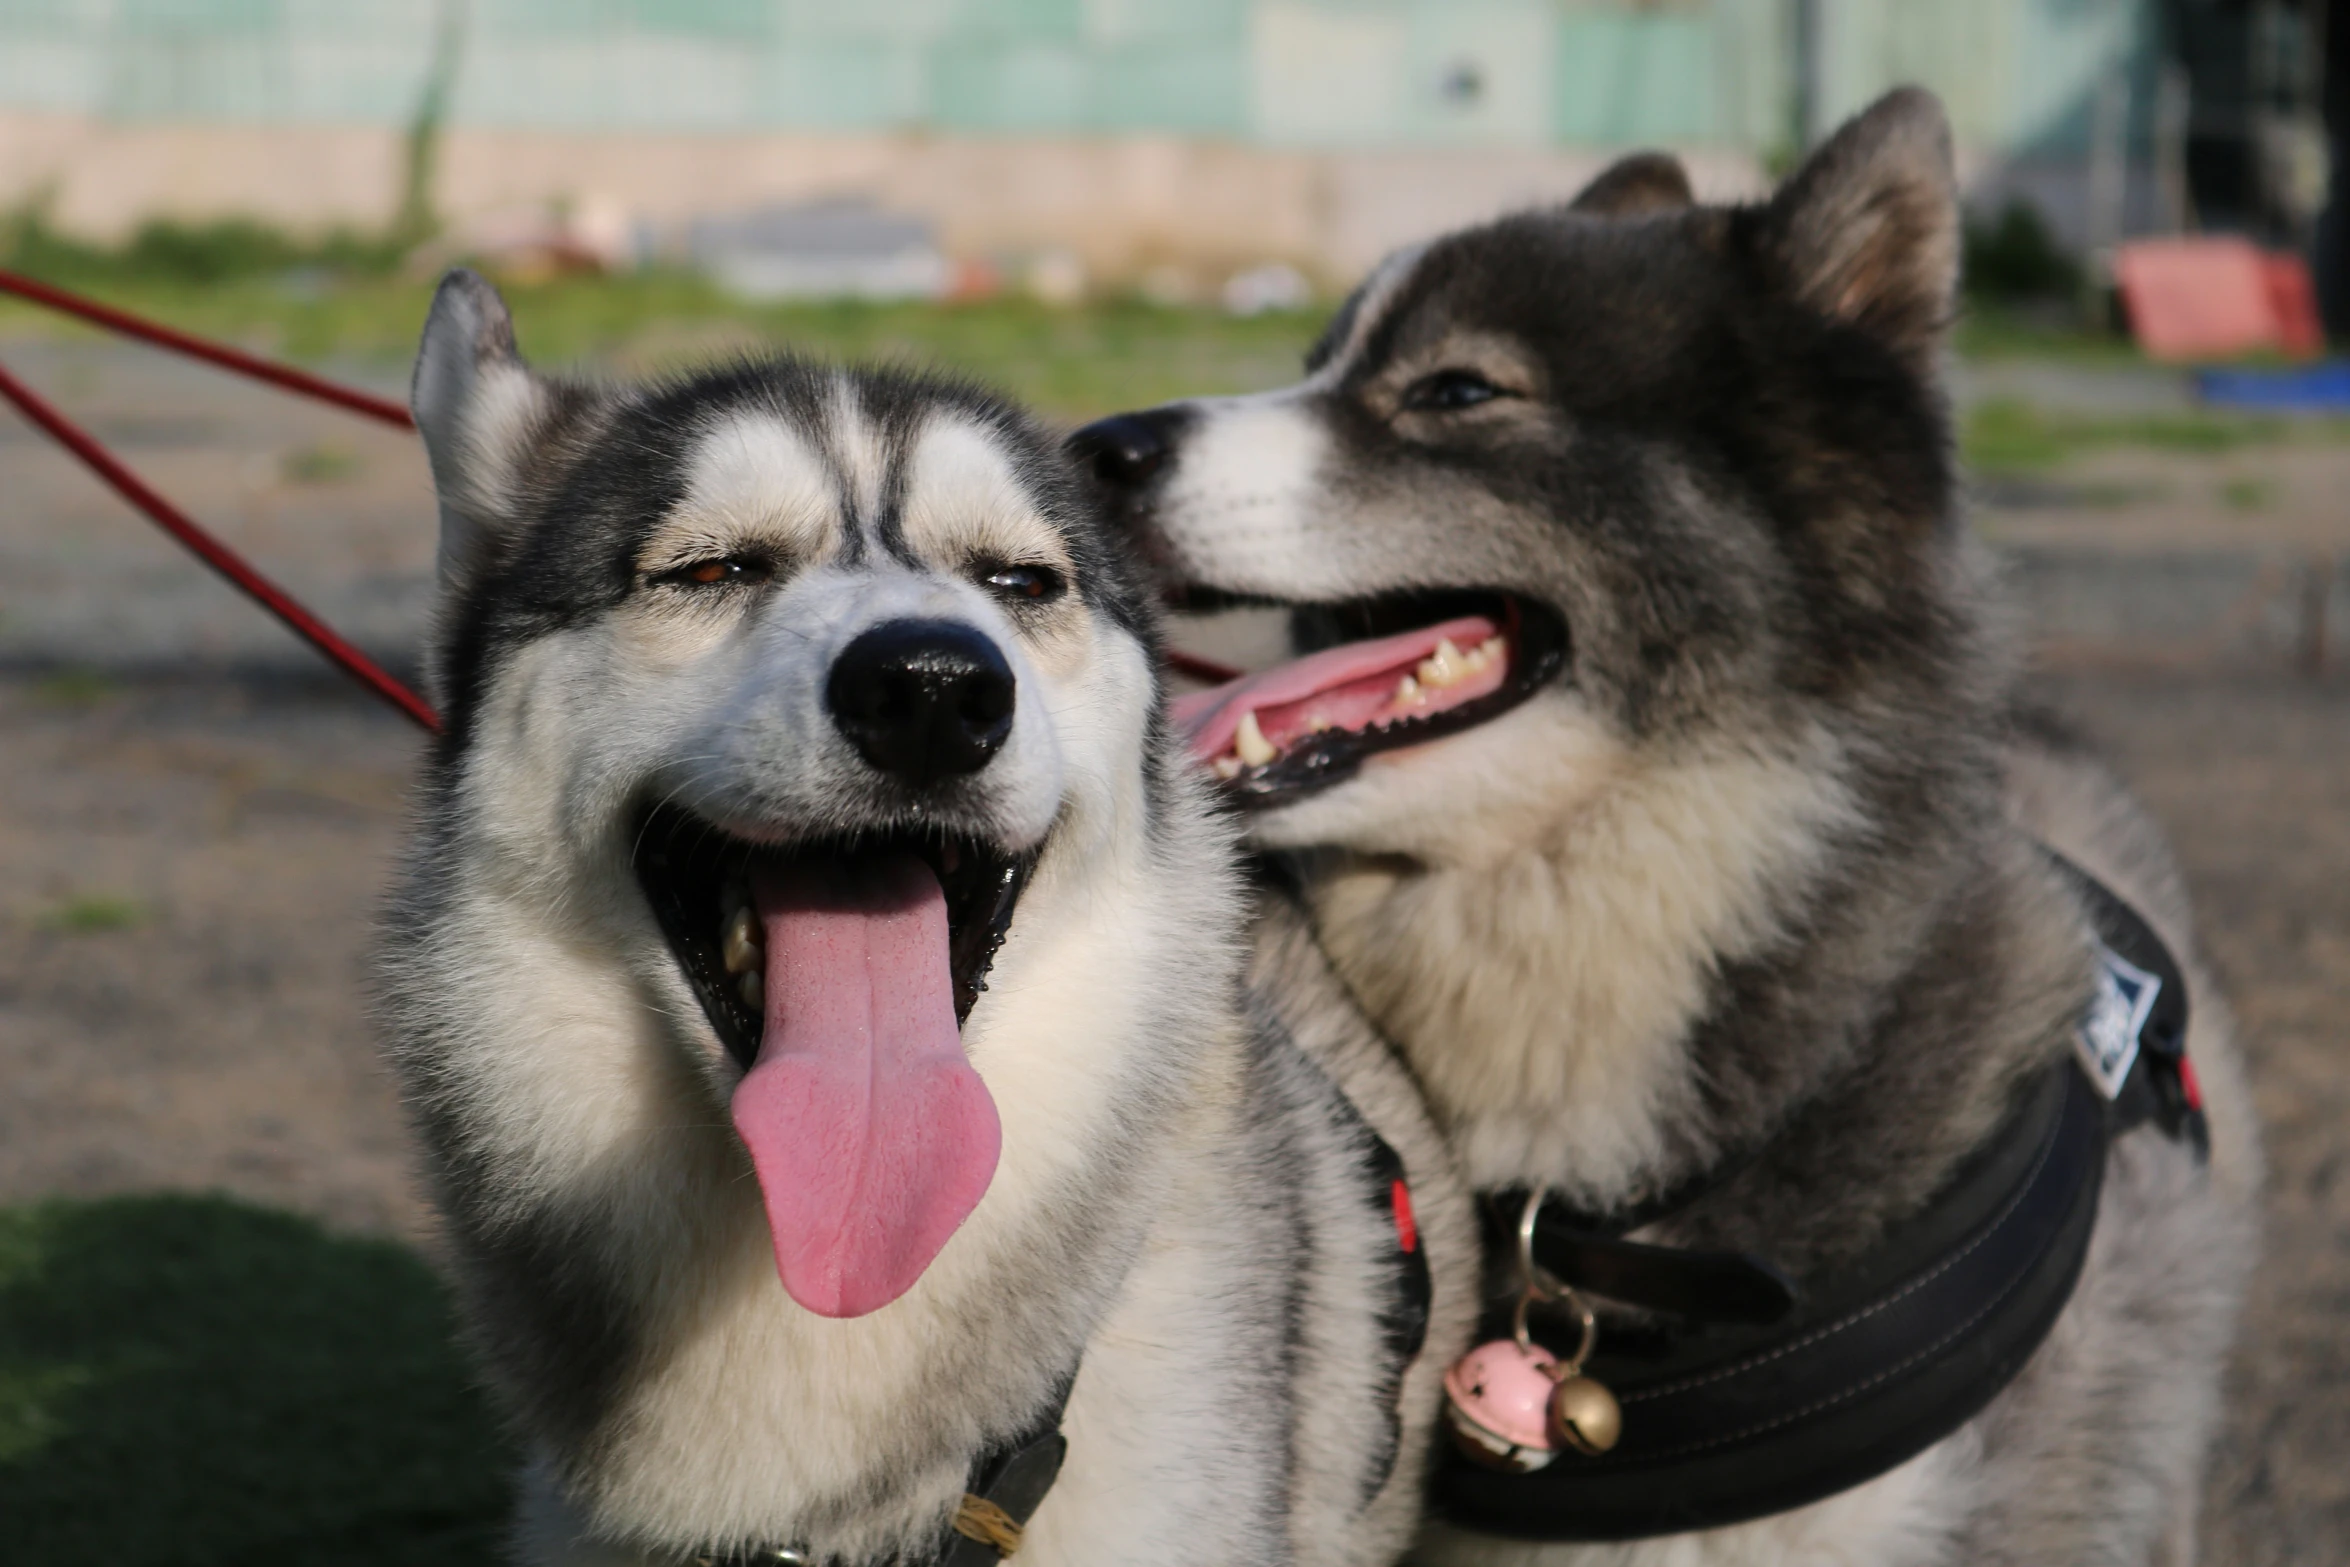 two alaskan husky dogs are ready for fun